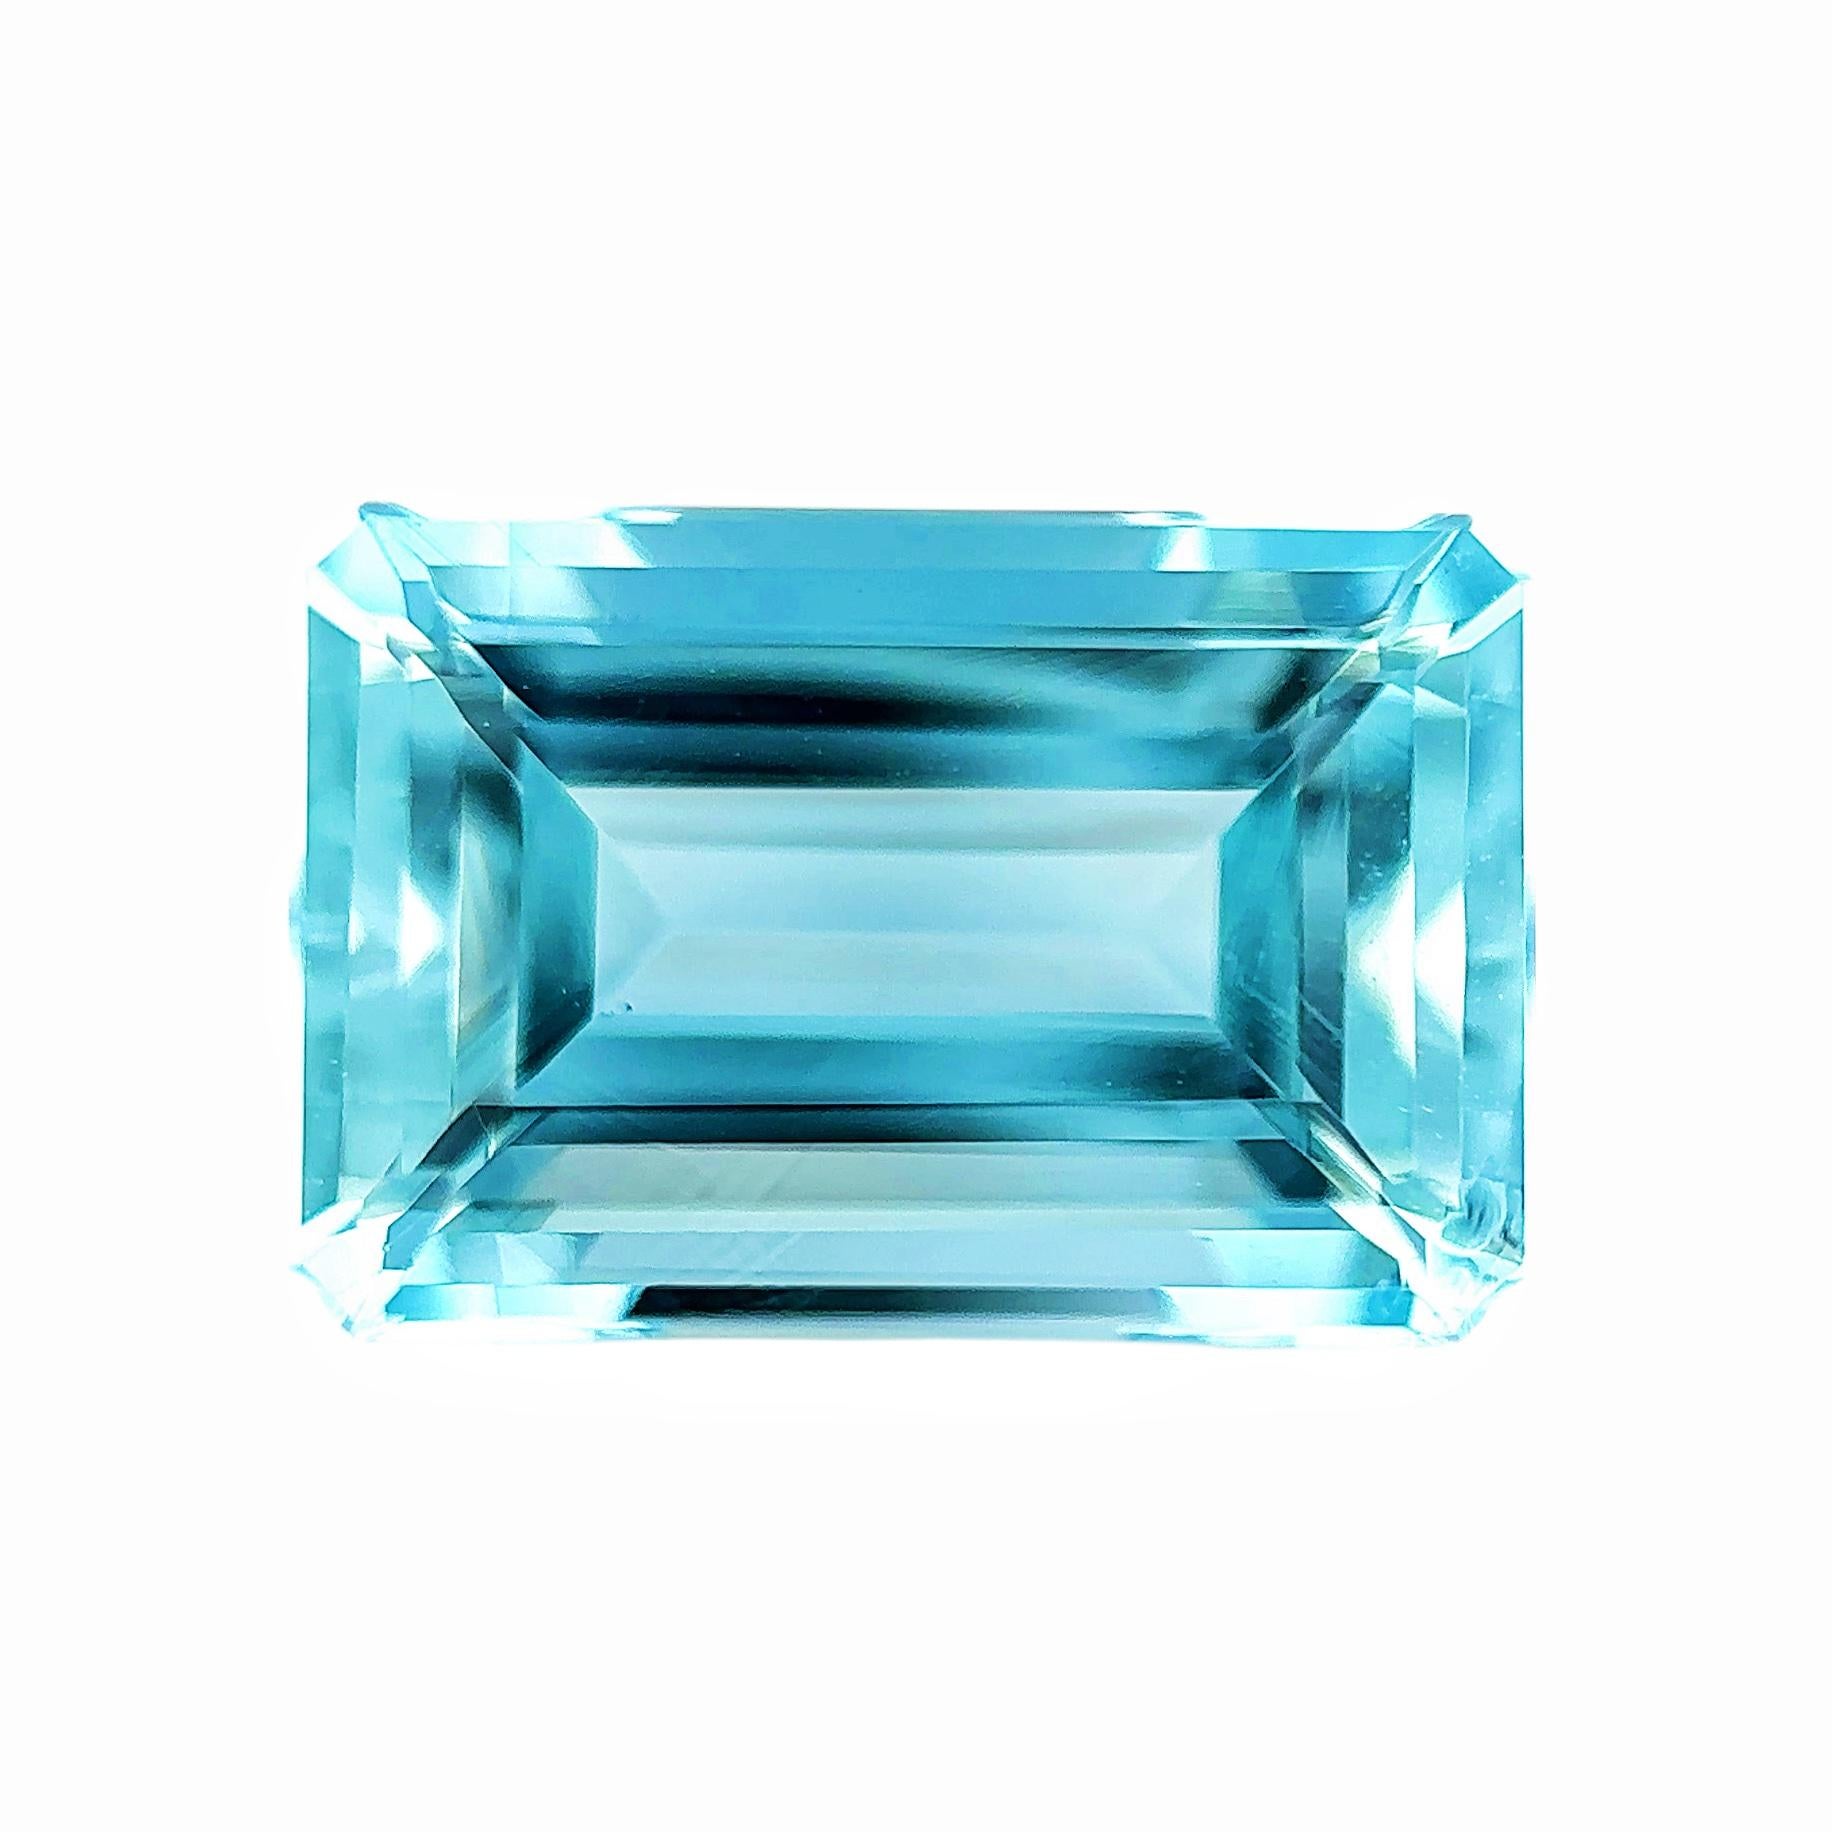 2.75 Carat Natural Aquamarine Loose Stone

GRS/GCS/GIA appointed lab certificate can be arranged upon request

This Item is ideal for your design as an engagement ring, cocktail ring, necklace, bracelet, etc.


ABOUT US

Xuelai Jewellery London is a